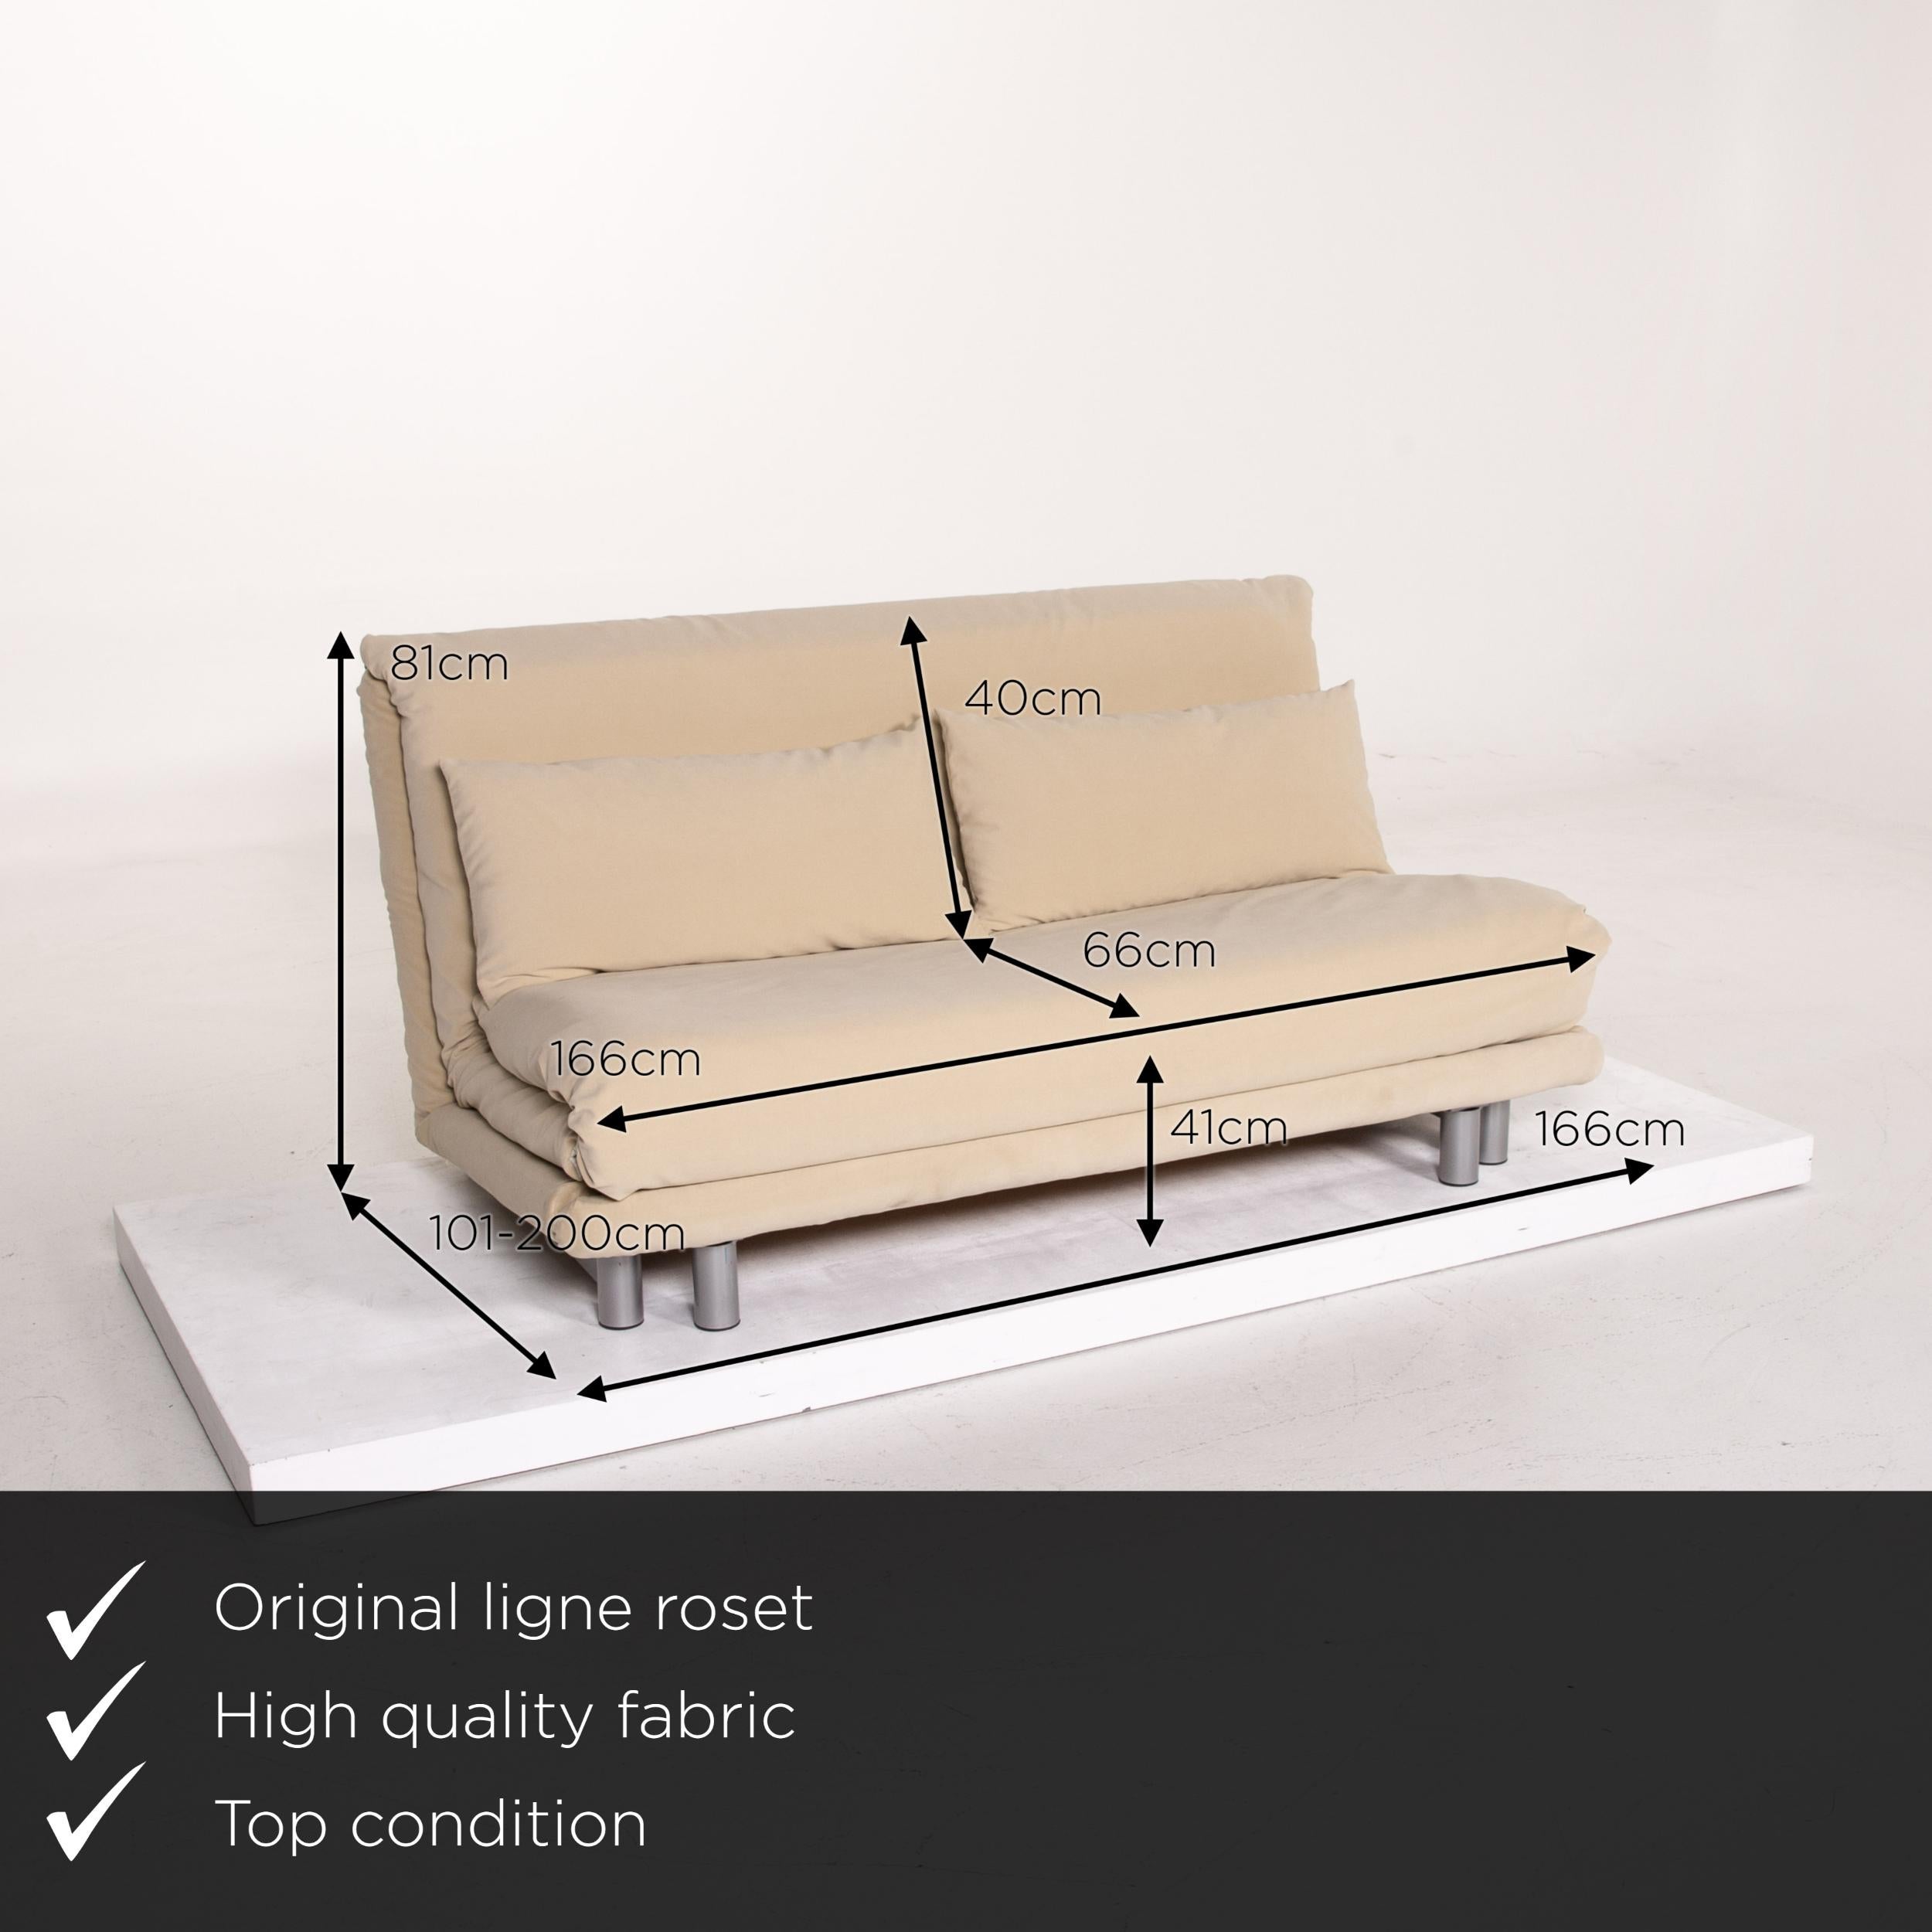 We present to you a Ligne Roset Multy fabric sofa bed beige two-seat sofa function sleeping.


 Product measurements in centimeters:
 

Depth 101
Width 166
Height 81
Seat height 41
Rest height
Seat depth 66
Seat width 166
Back height